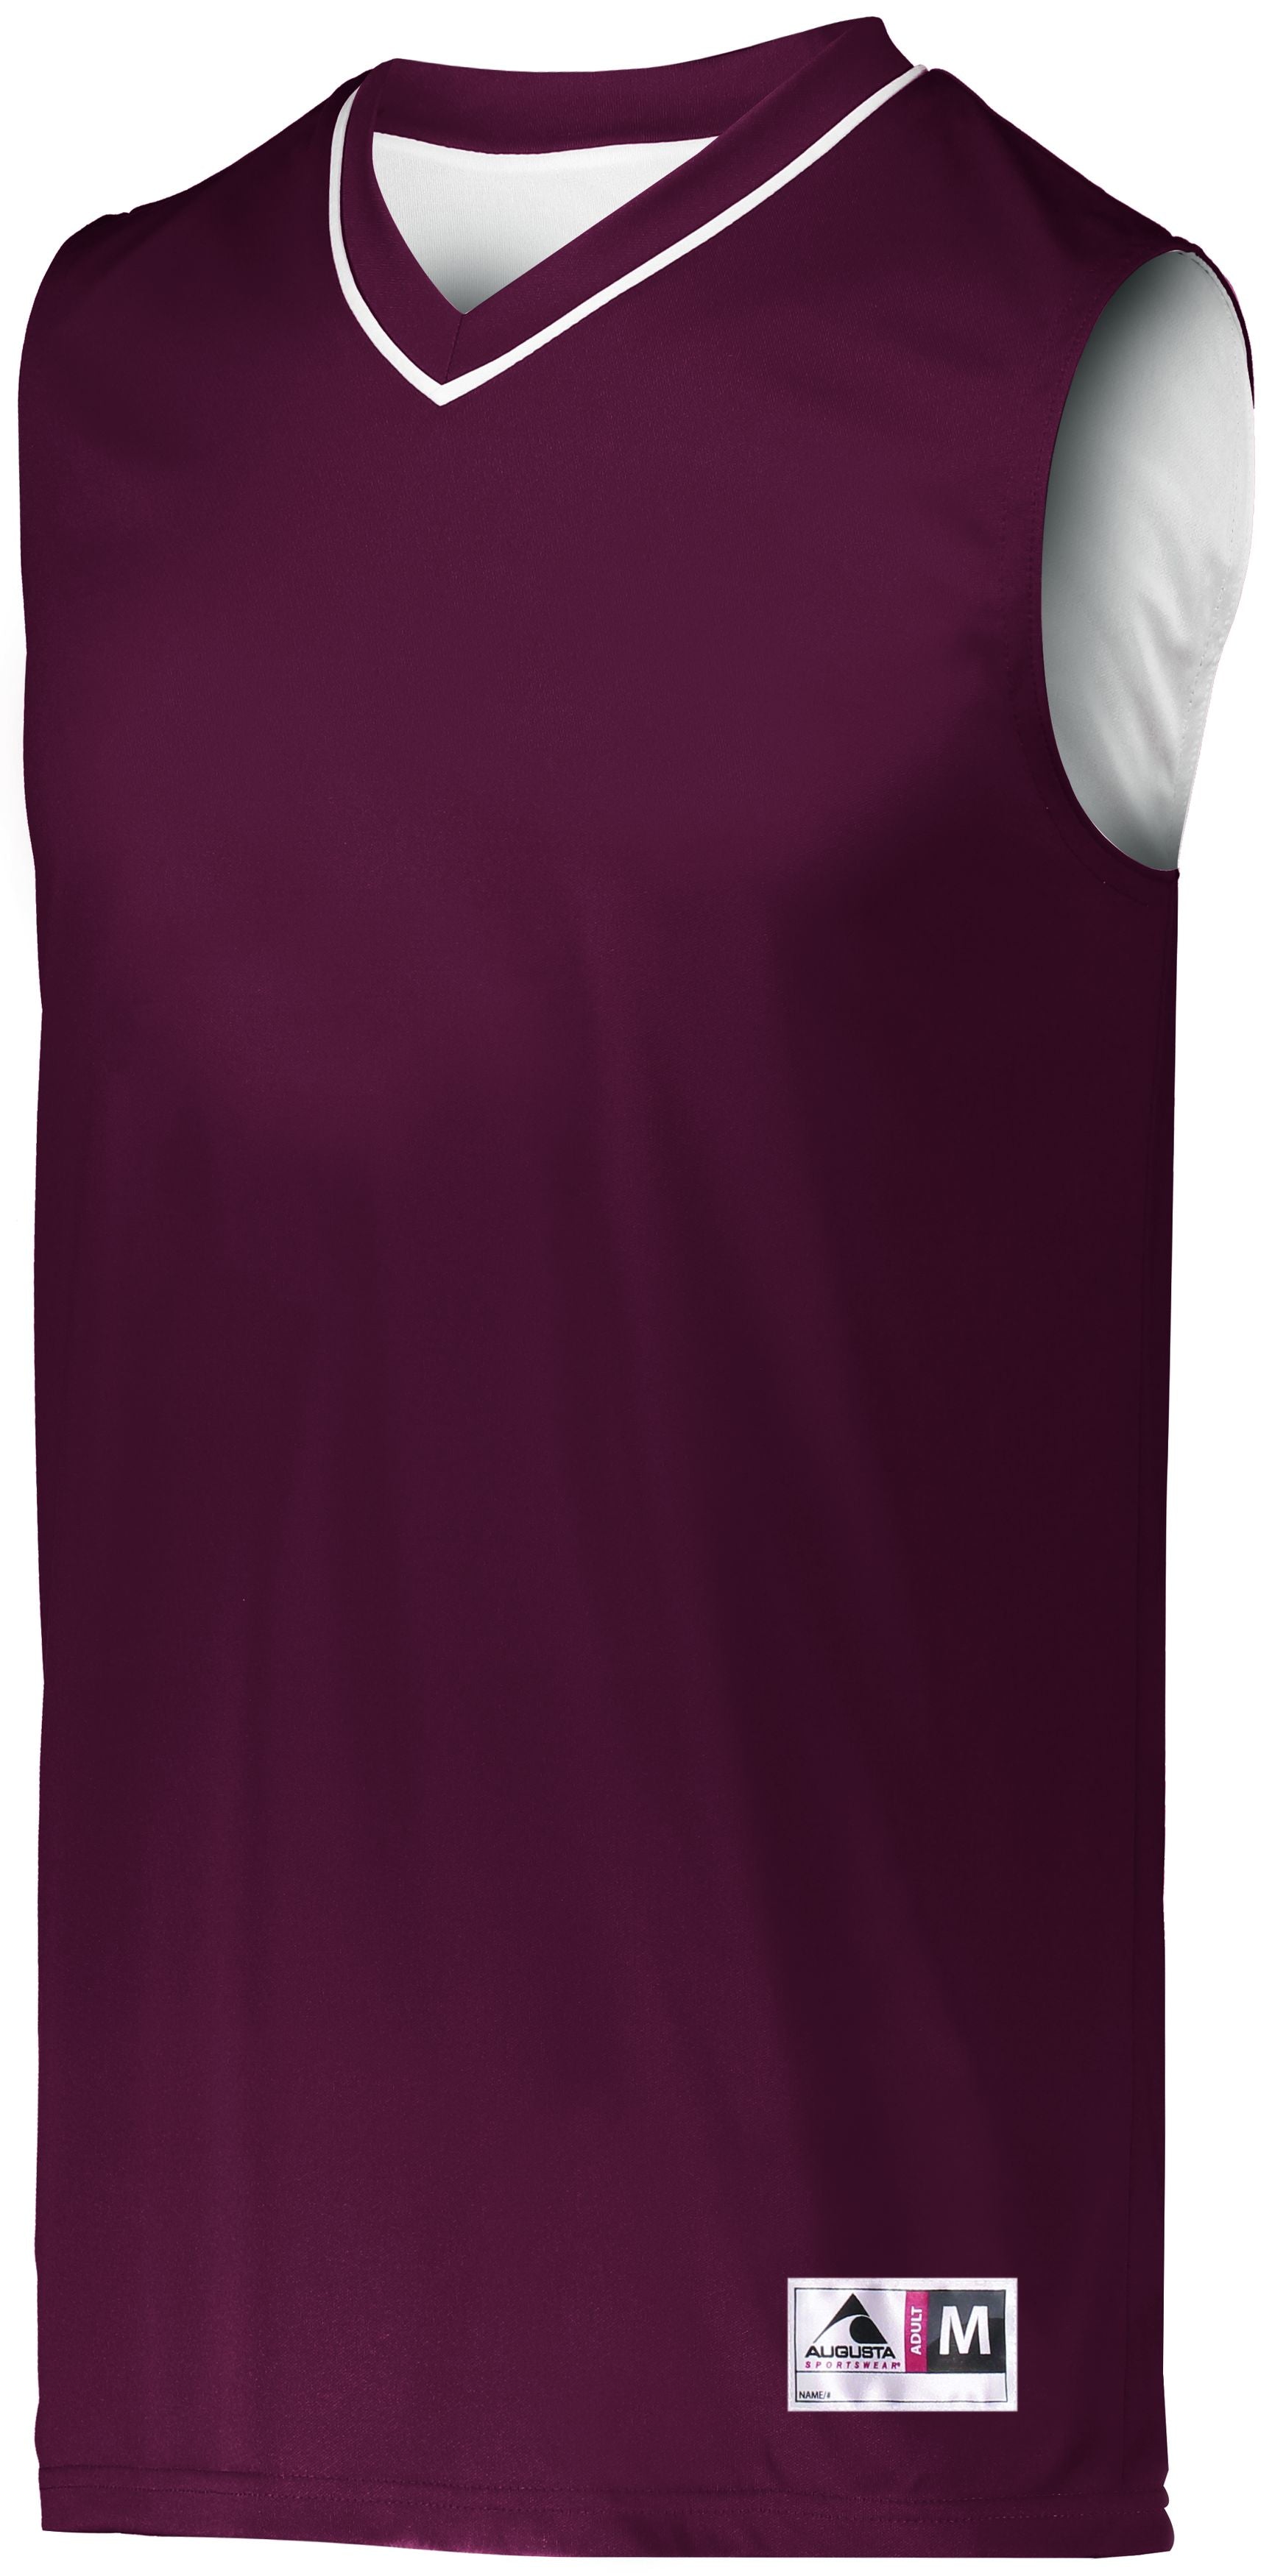 Augusta Sportswear Youth Reversible Two-Color Jersey in Maroon/White  -Part of the Youth, Youth-Jersey, Augusta-Products, Basketball, Shirts, All-Sports, All-Sports-1 product lines at KanaleyCreations.com